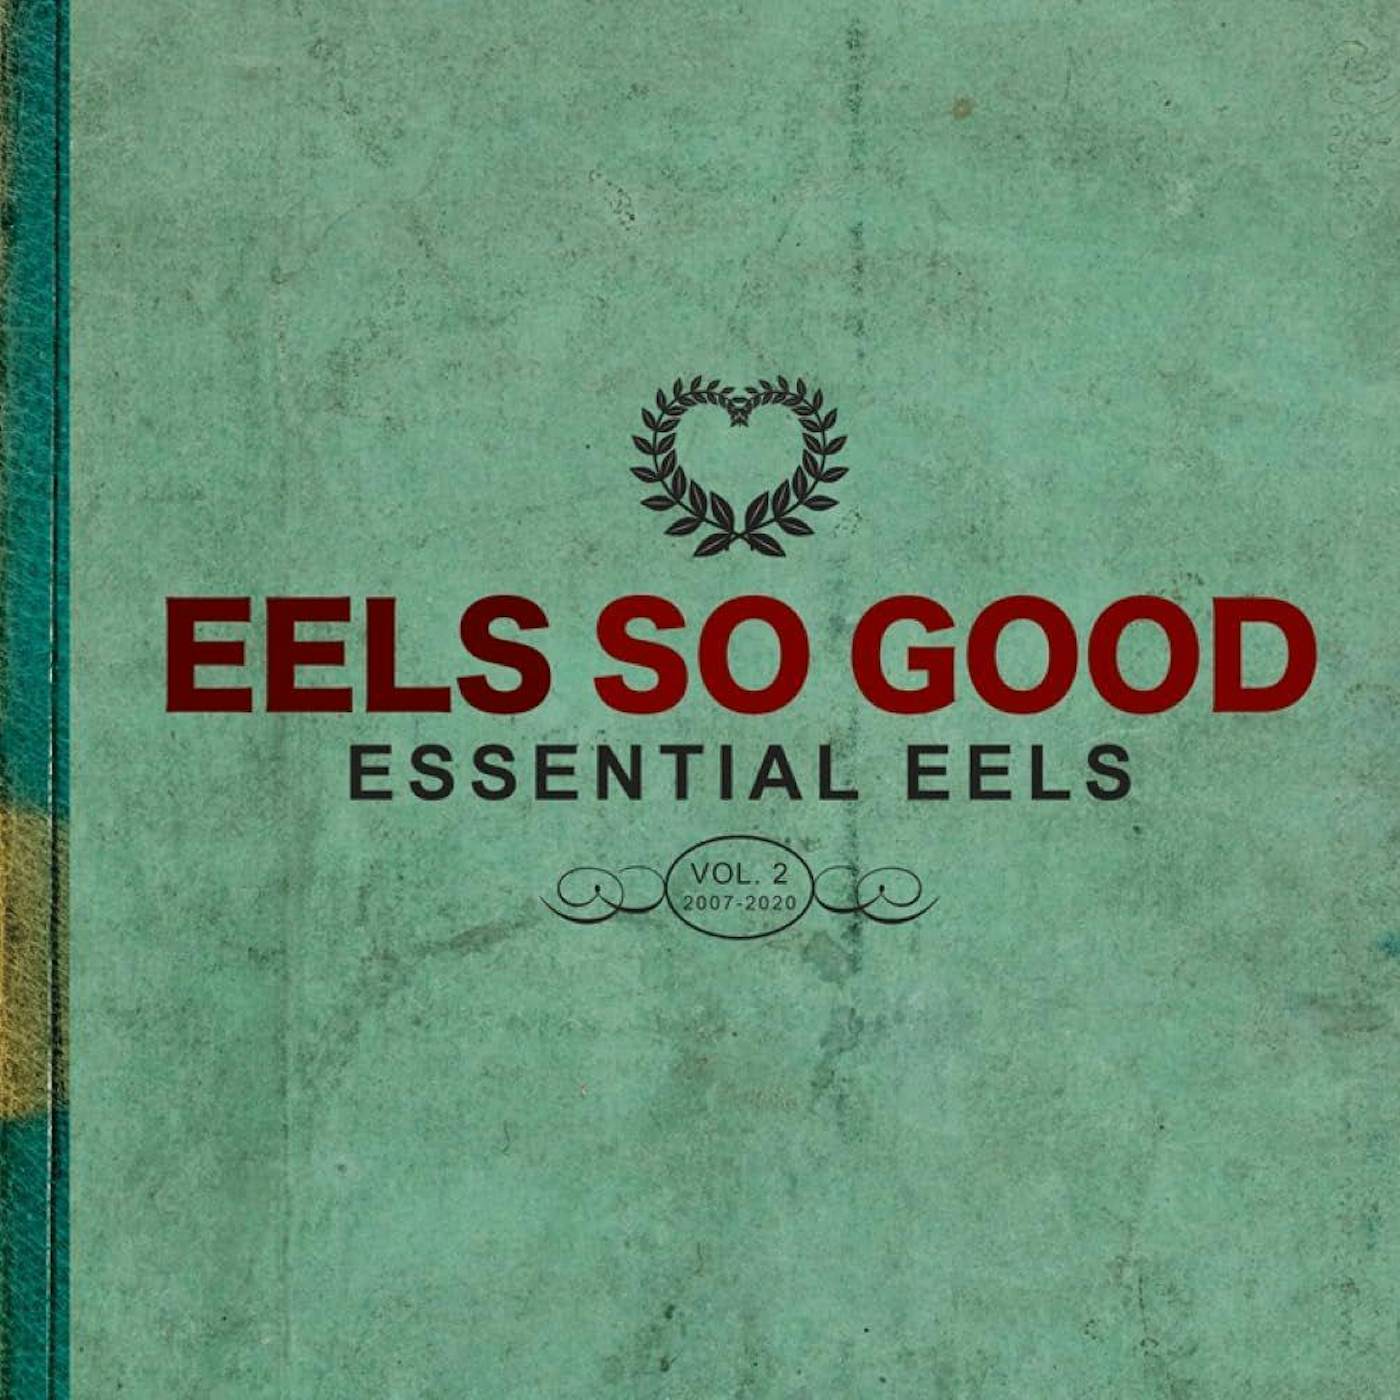 Eels - The Cautionary Tales Of Mark Oliver Everett [CD] 5414939920585